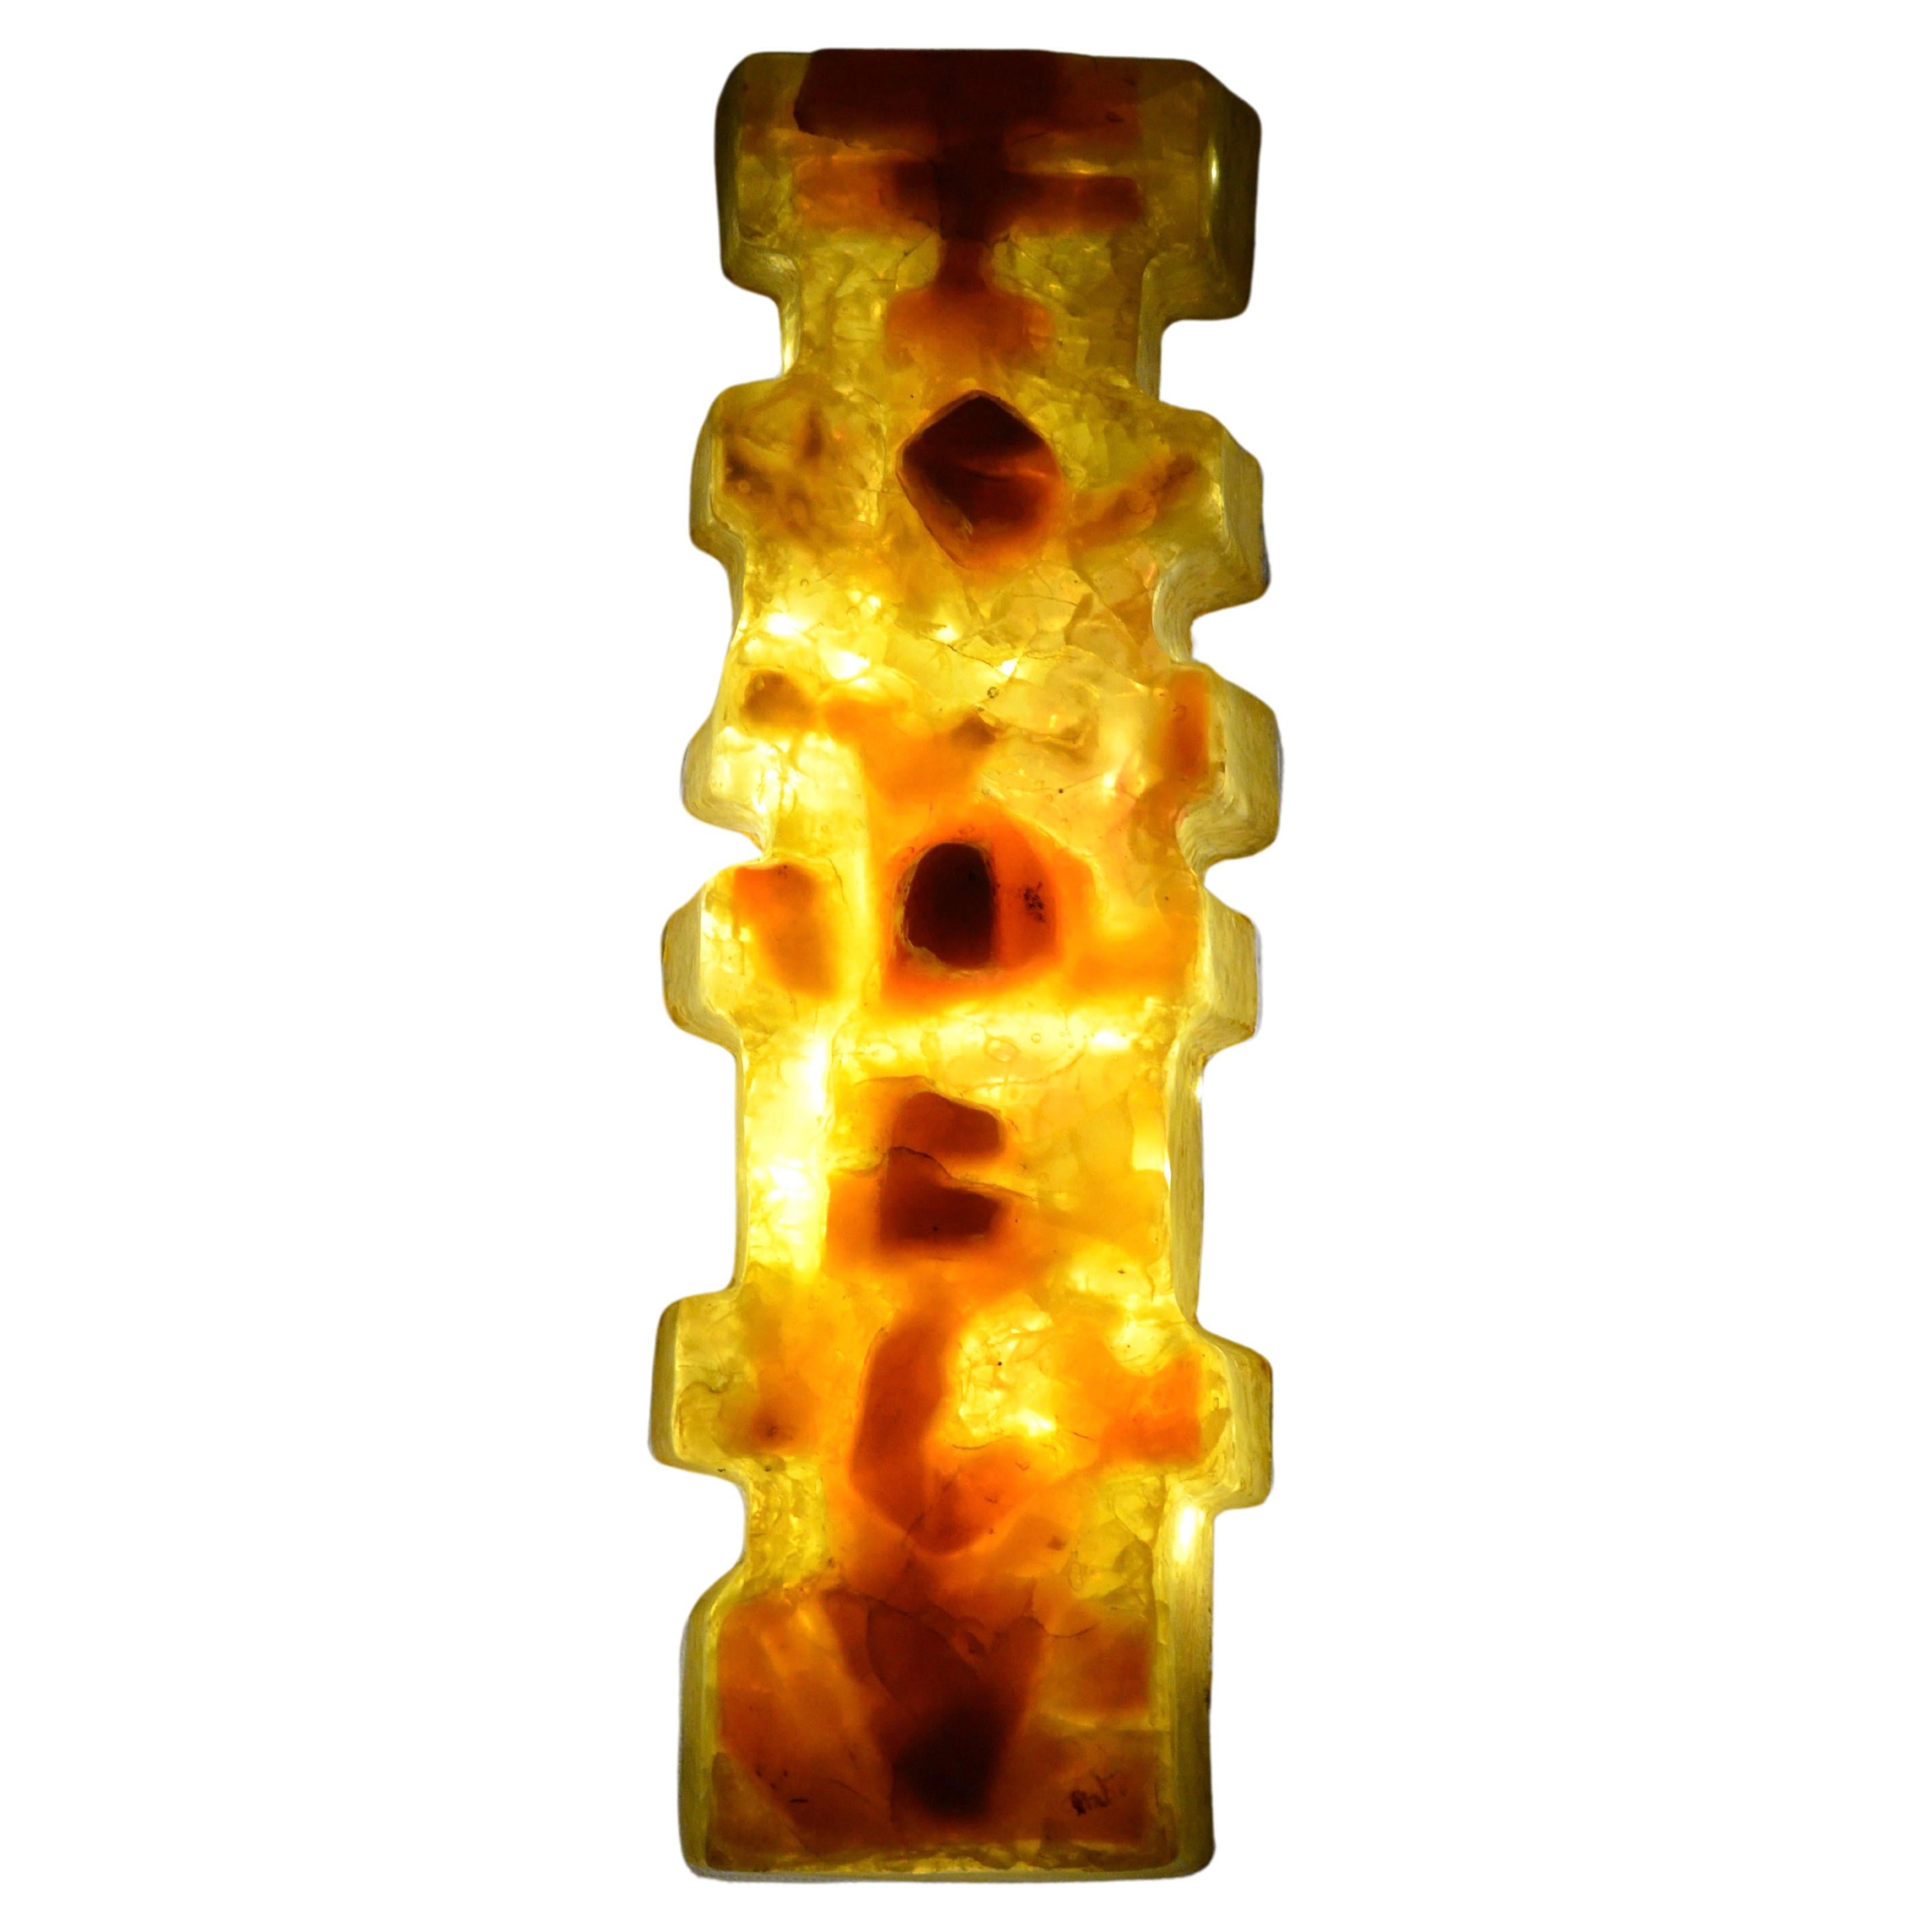 Totem sculpture in fractal resin signed by Matius, France, 1970s